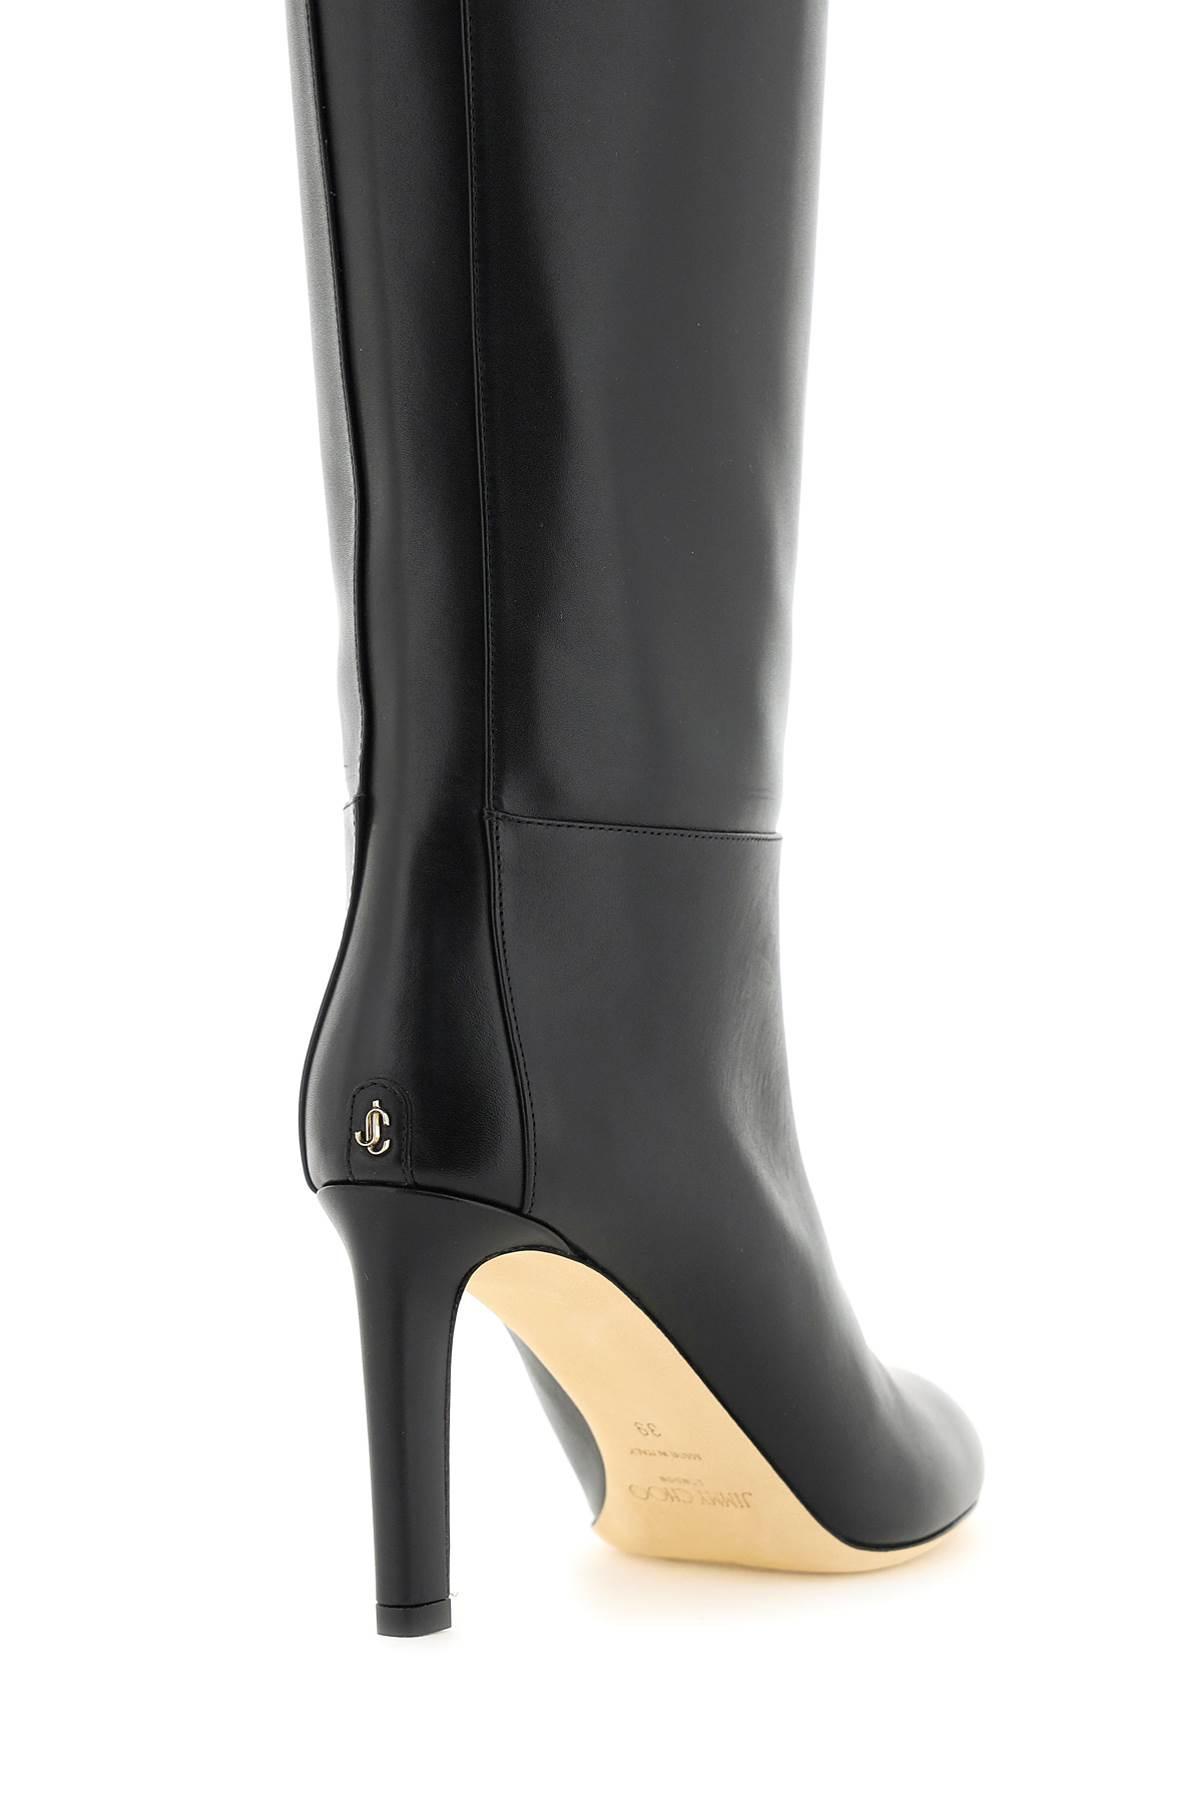 Jimmy Choo Karter 85 Leather Boots in Black | Lyst Canada